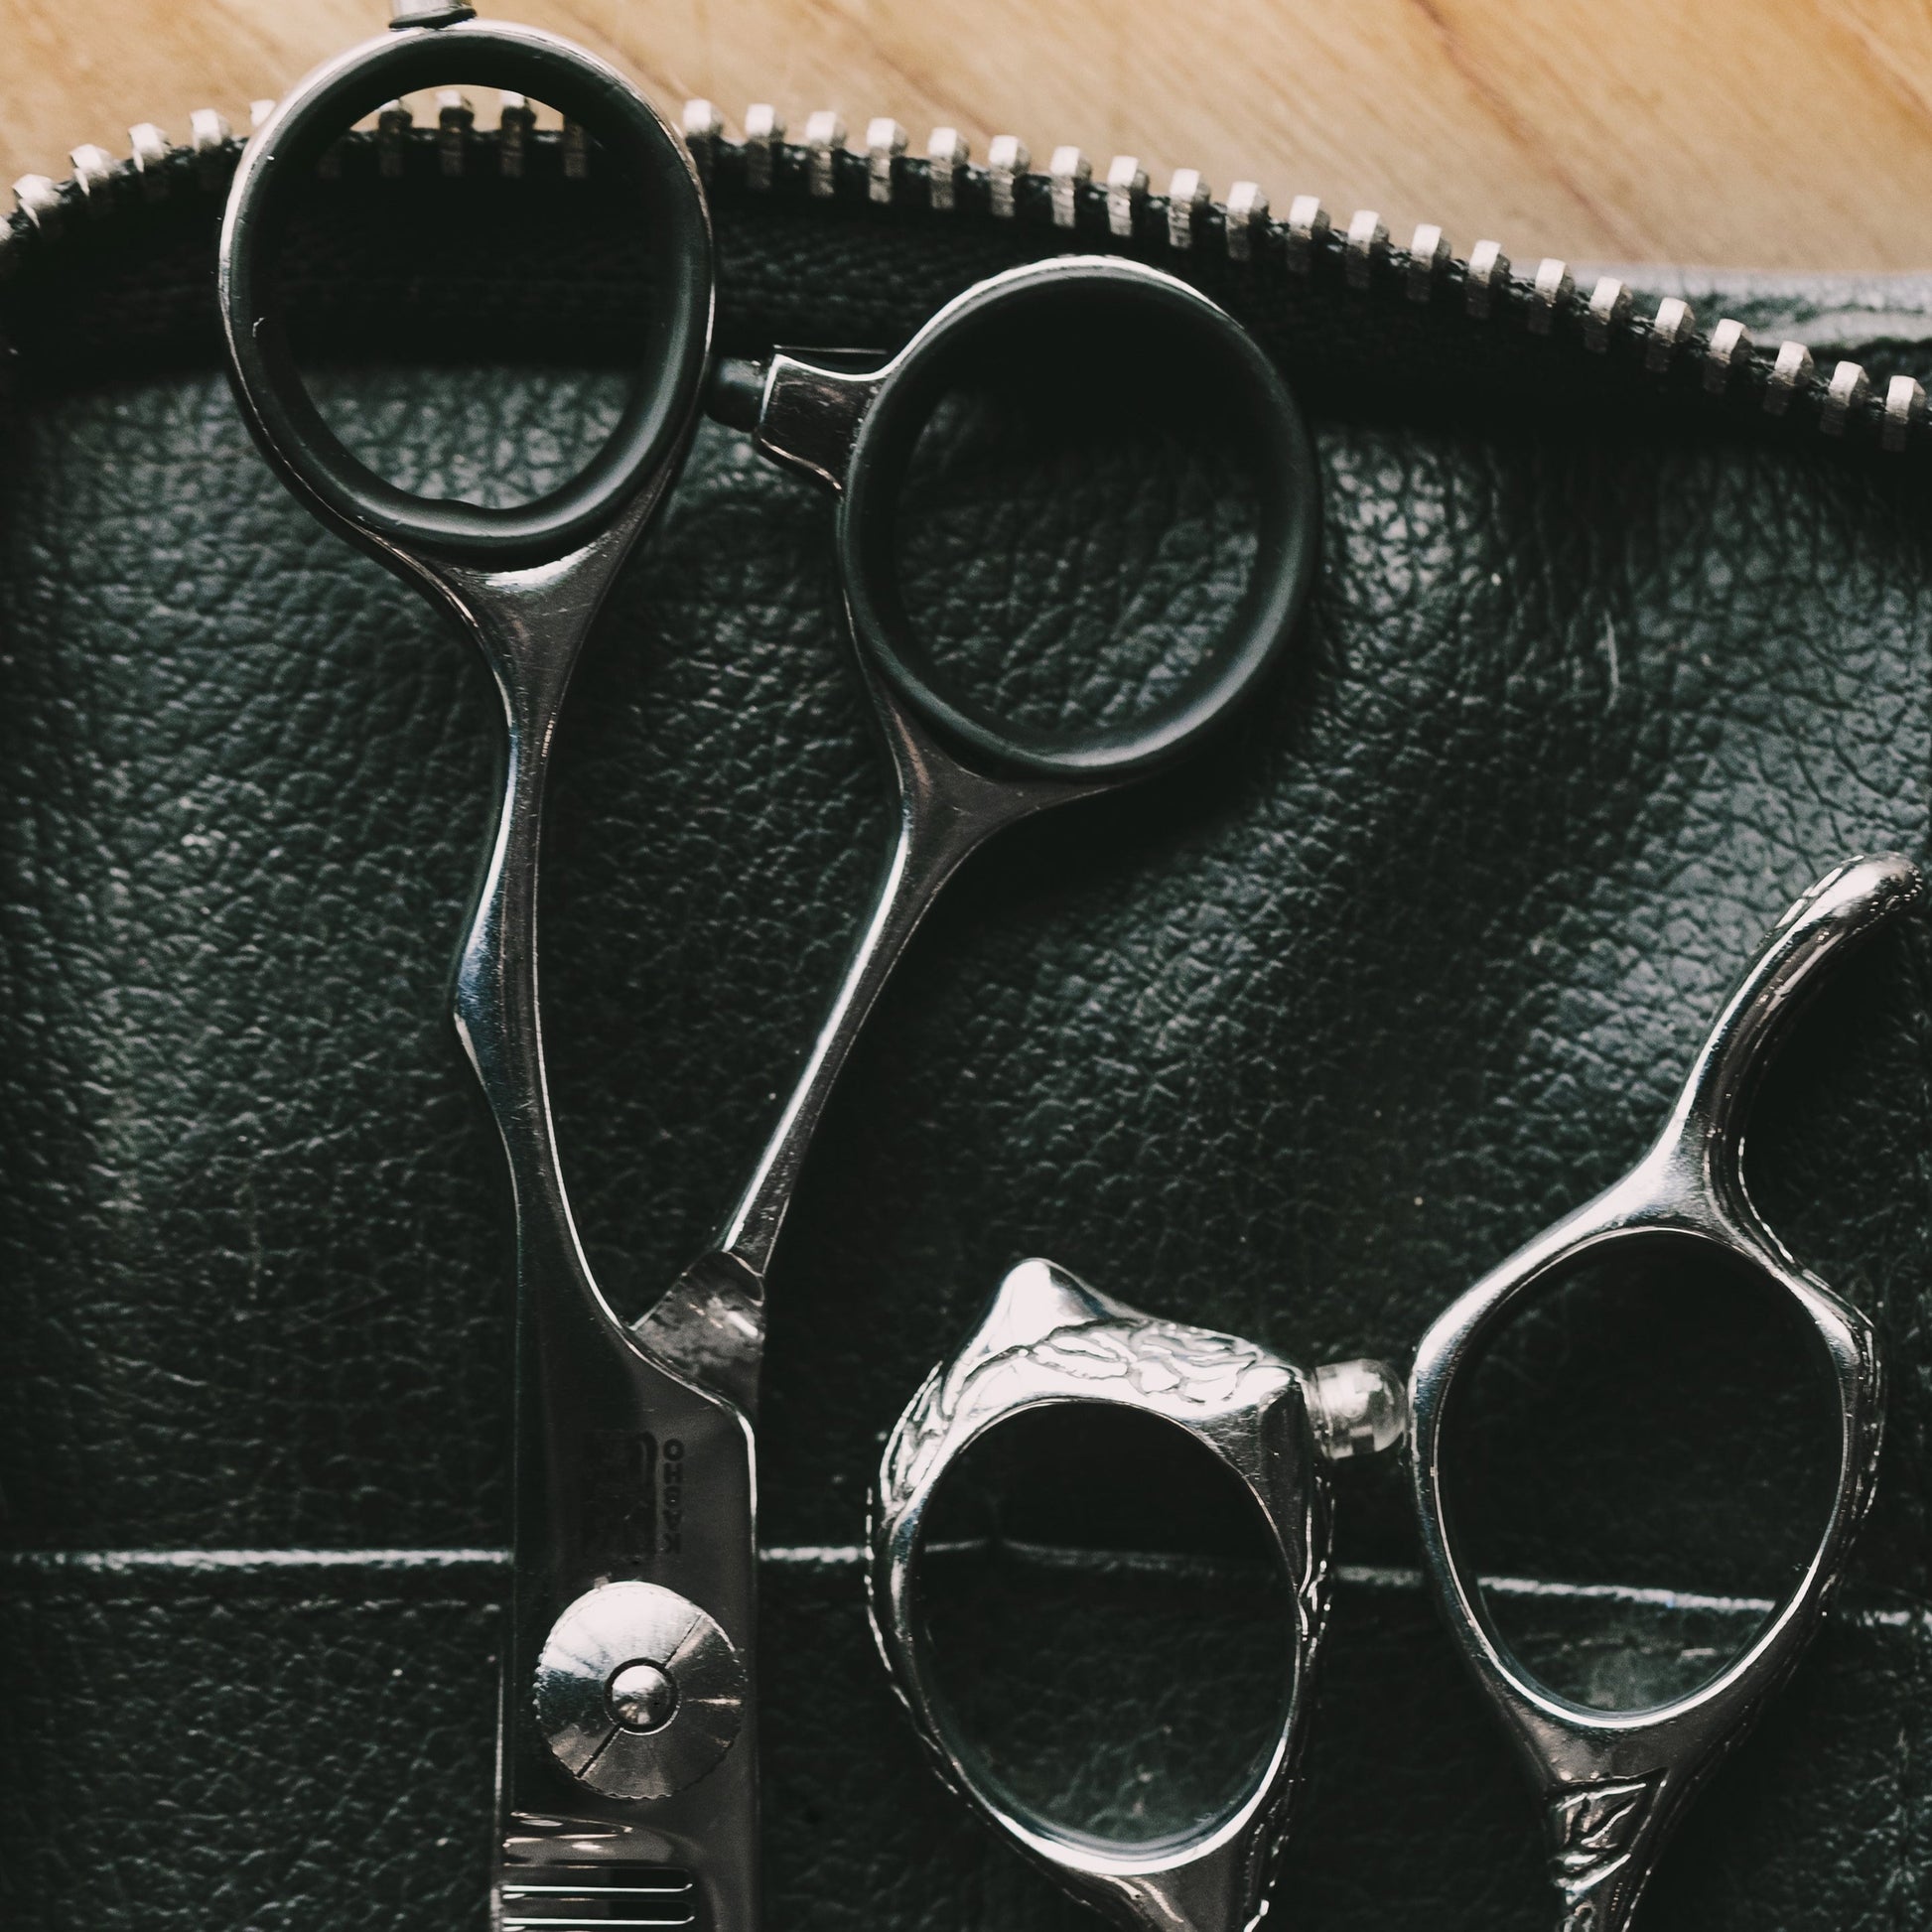 A Hairdressers tools in a leather case showing scissors and thinning tools.